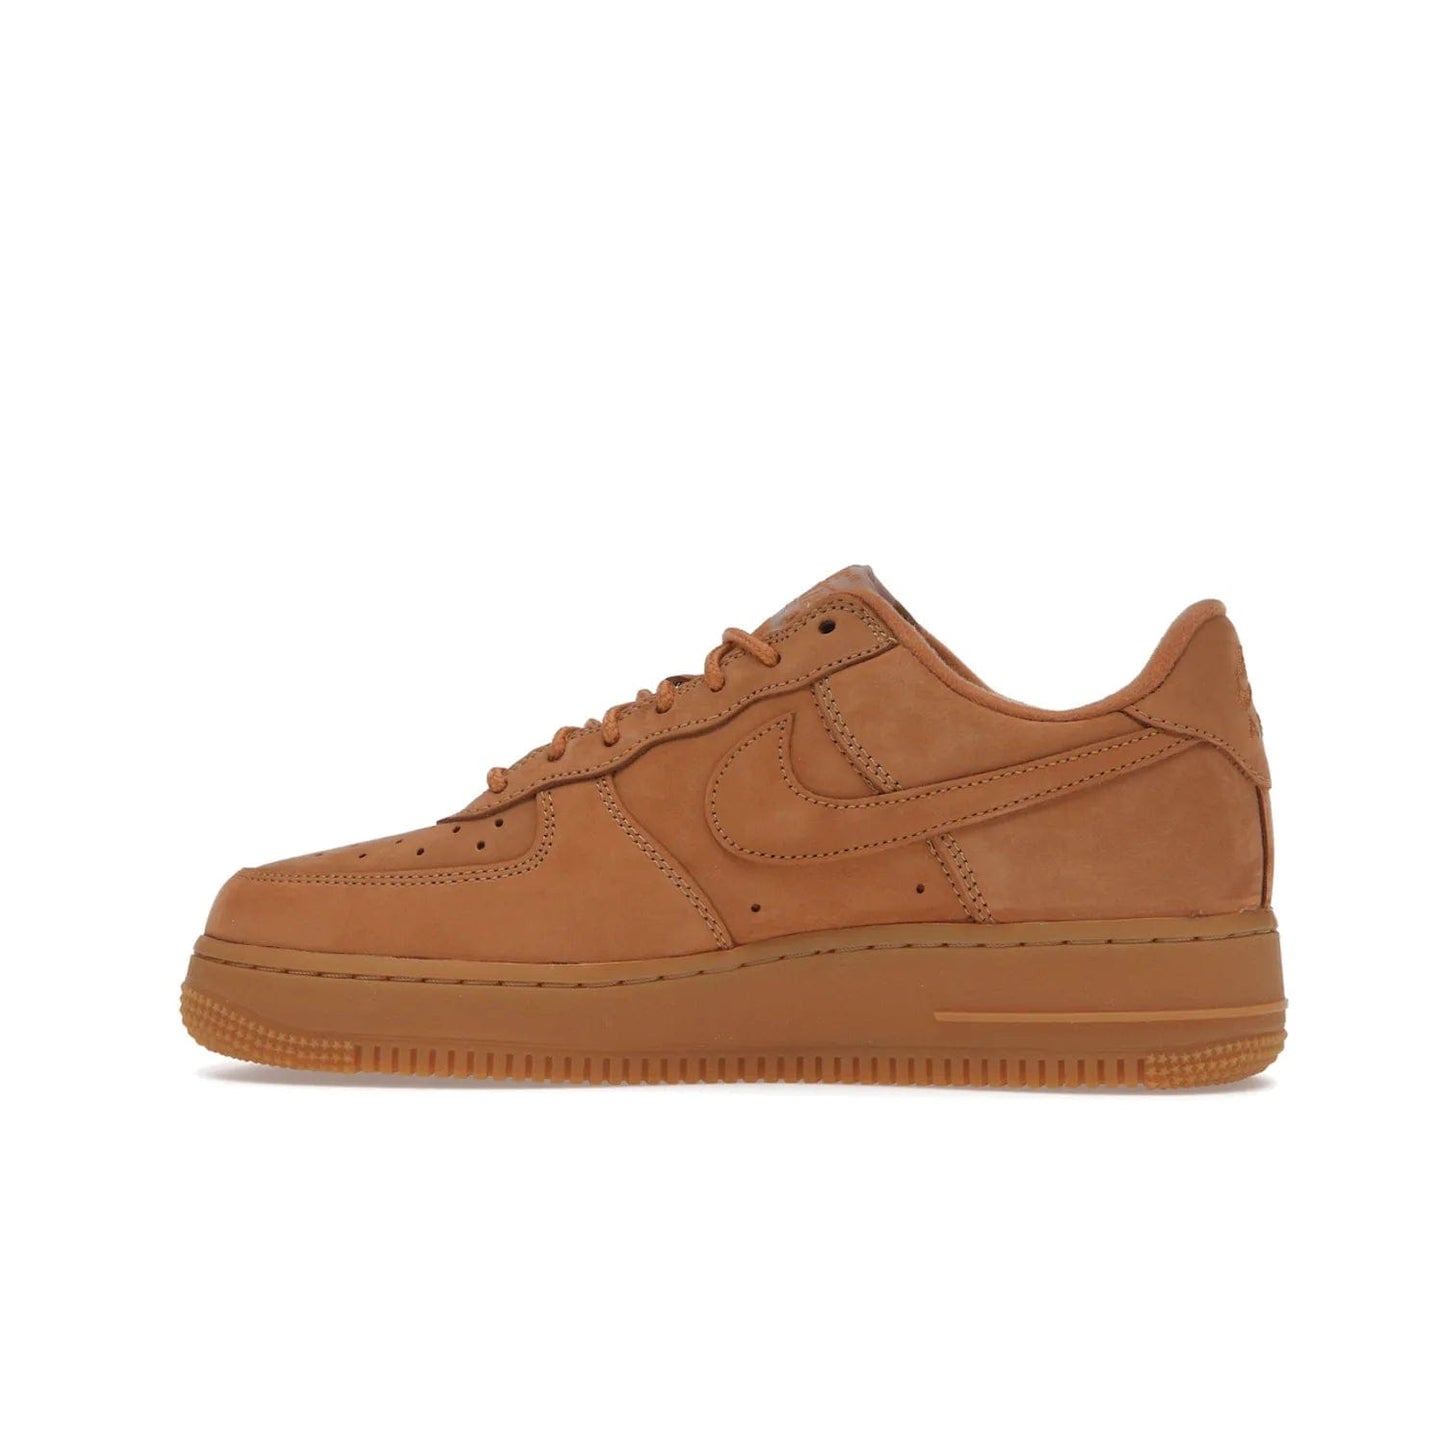 Nike Air Force 1 Low SP Supreme Wheat - Image 20 - Only at www.BallersClubKickz.com - A luxe Flax Durabuck upper and Supreme Box Logo insignias on the lateral heels make the Nike Air Force 1 Low SP Supreme Wheat a stylish lifestyle shoe. Matching Flax Air sole adds a classic touch to this collaboration between Nike and Supreme. Make a statement with this edition of the classic Air Force 1 Low.